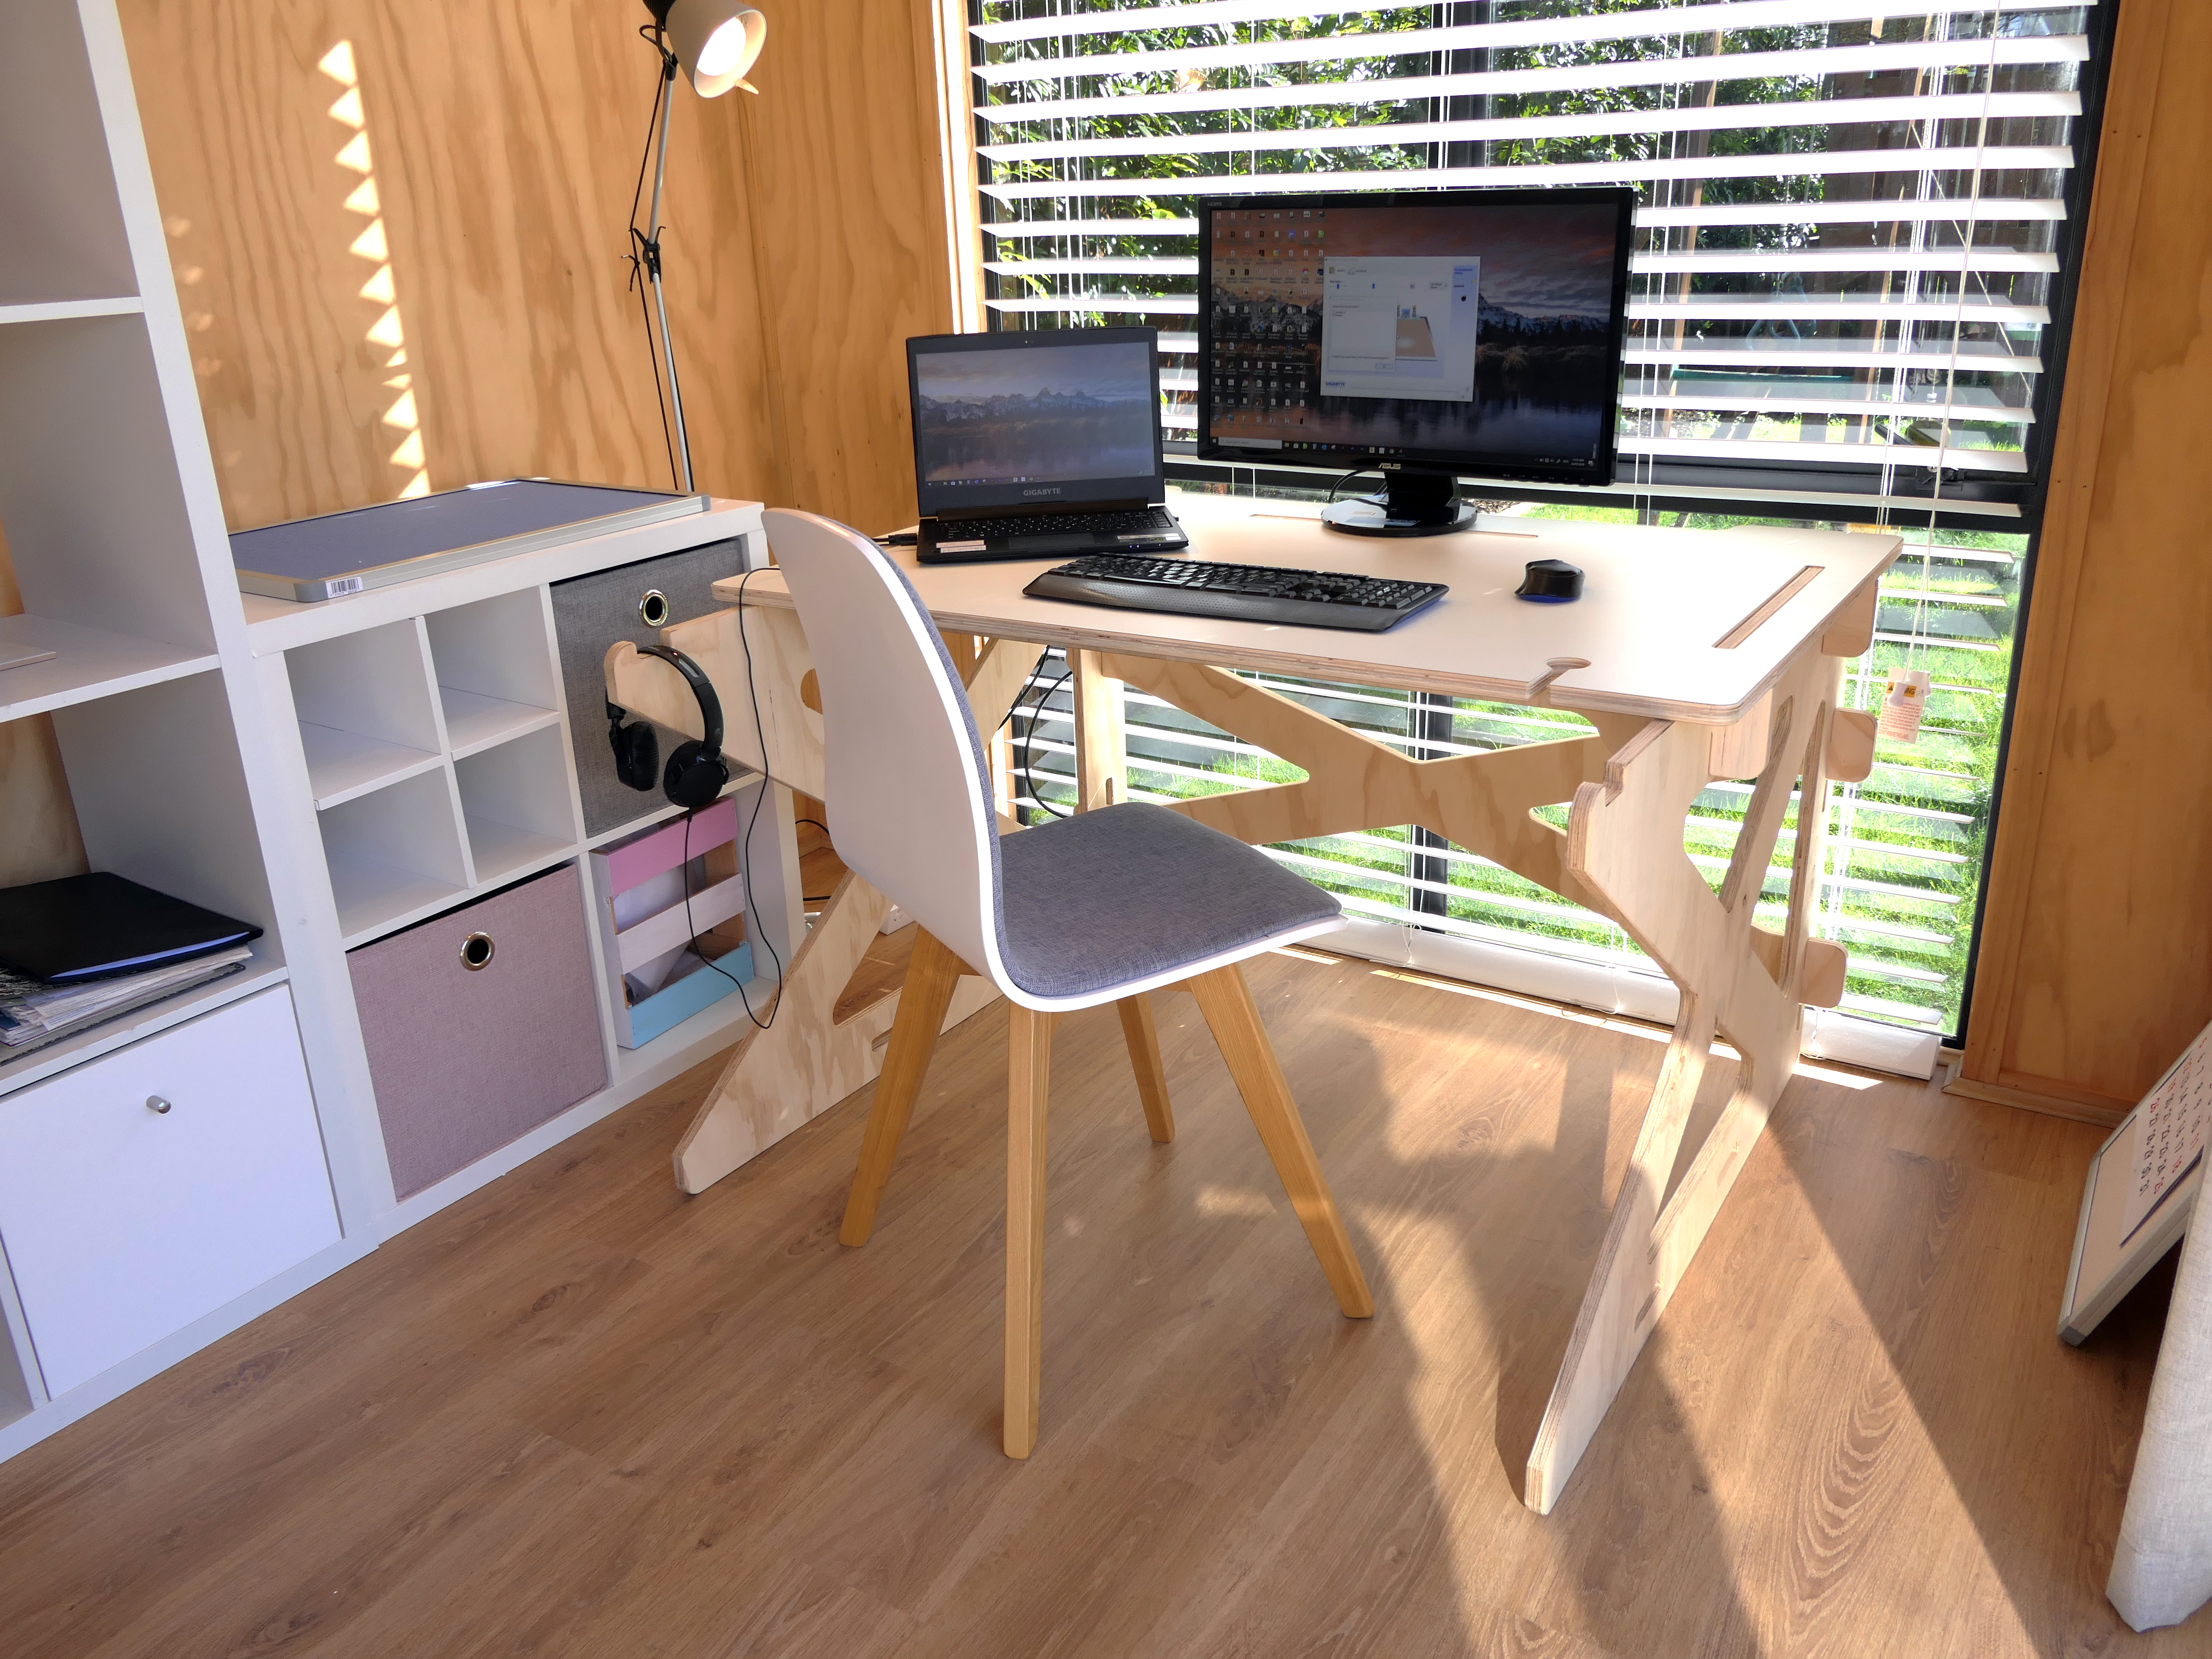 The SLOT Premier desk in 'sitting' mode. It can also be set up for 'standing' mode.